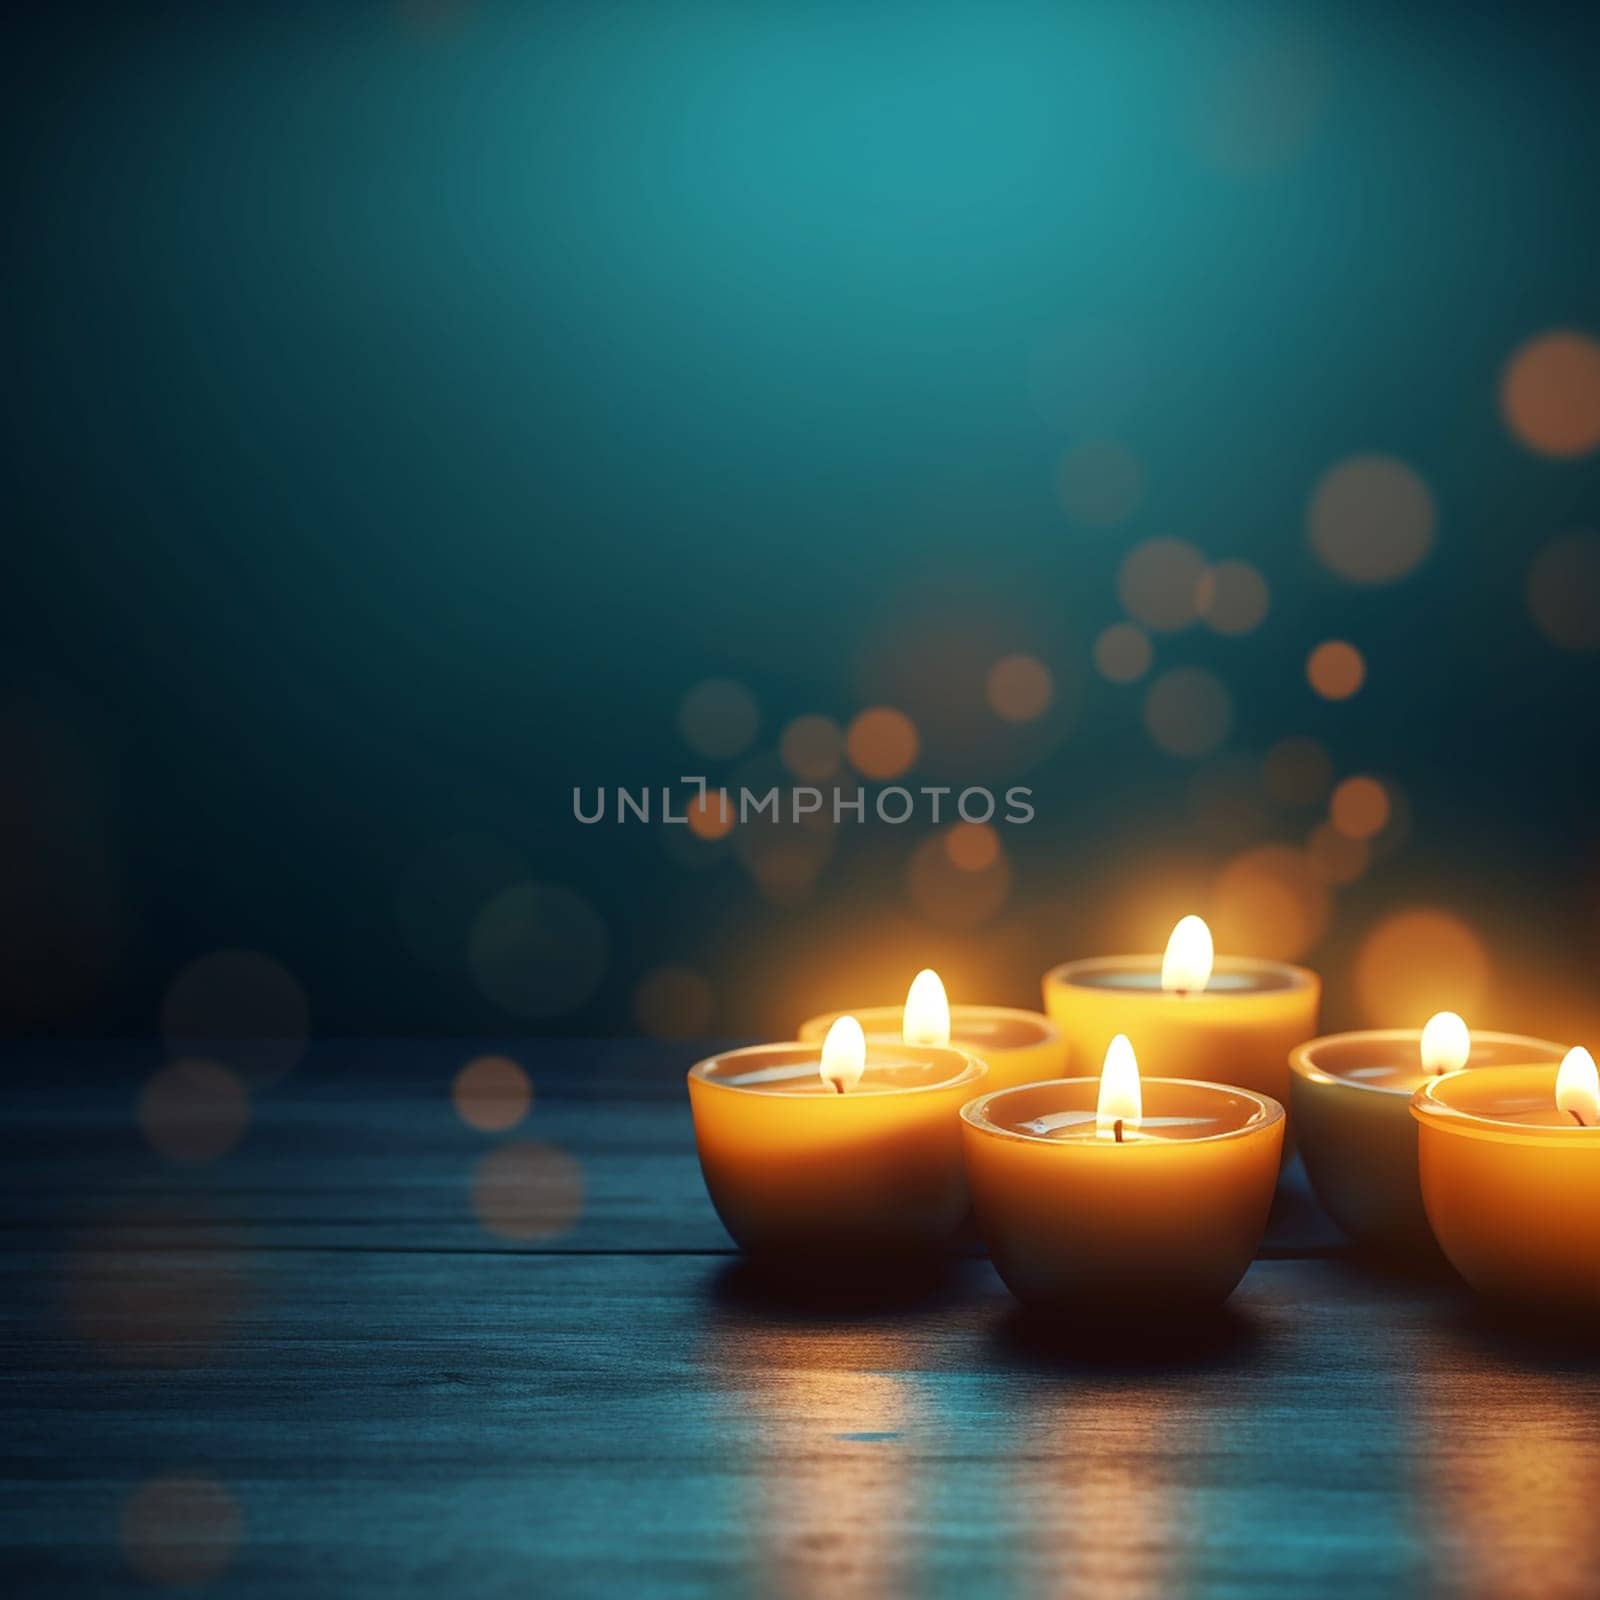 Several lit candles with an atmospheric glow against a dark background.